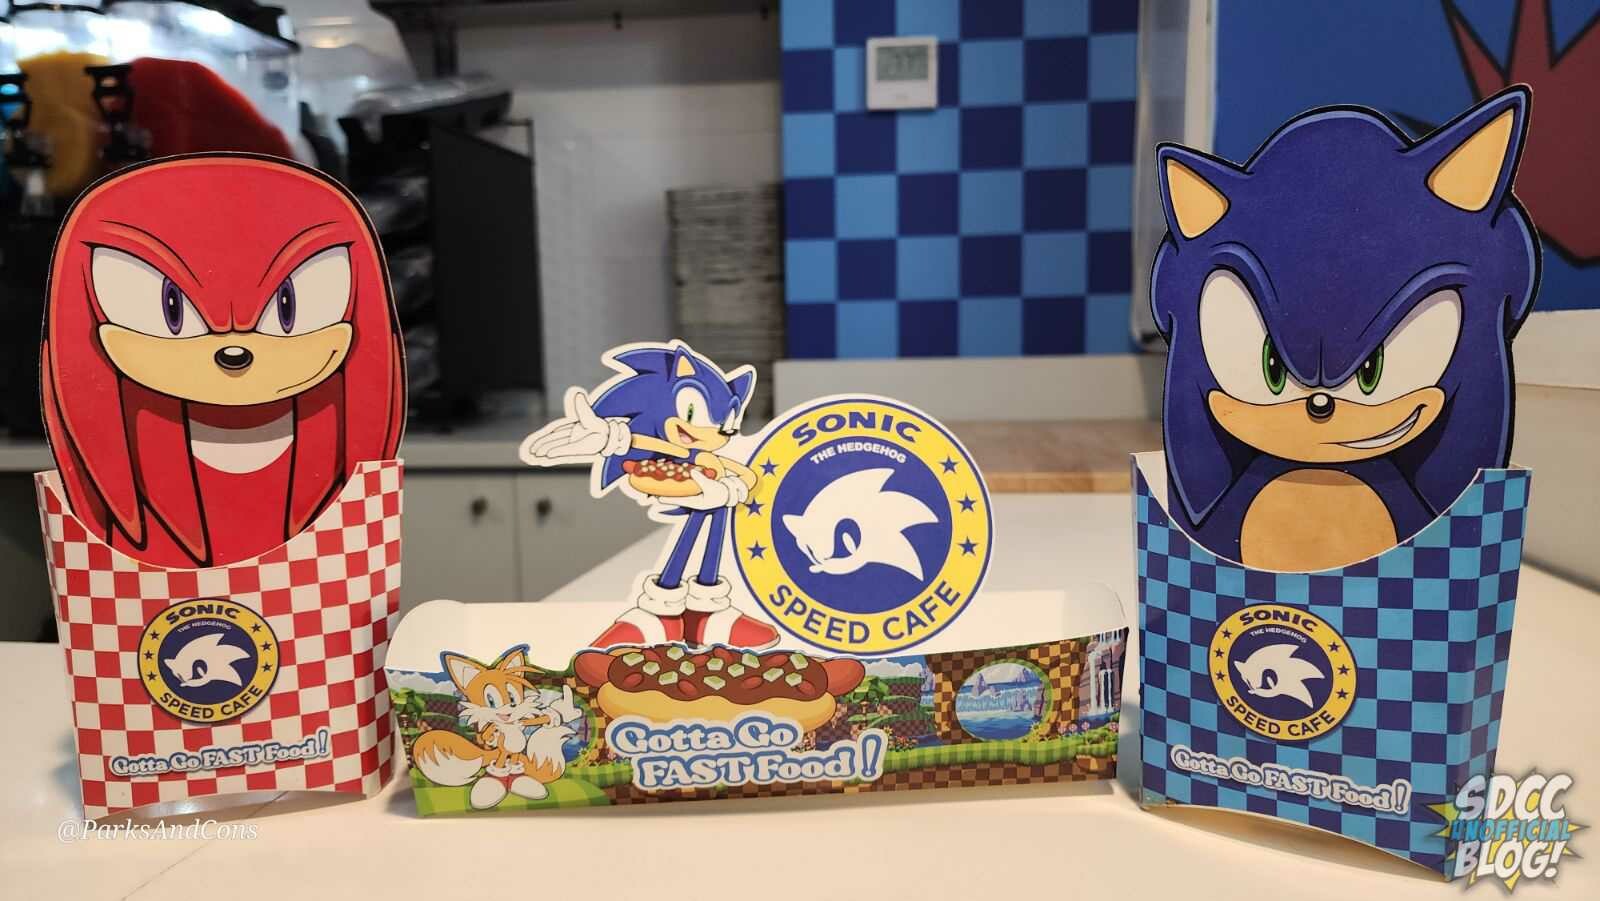 Sonic the Hedgehog on X: Gotta. Go. Fast! Check out the brand new